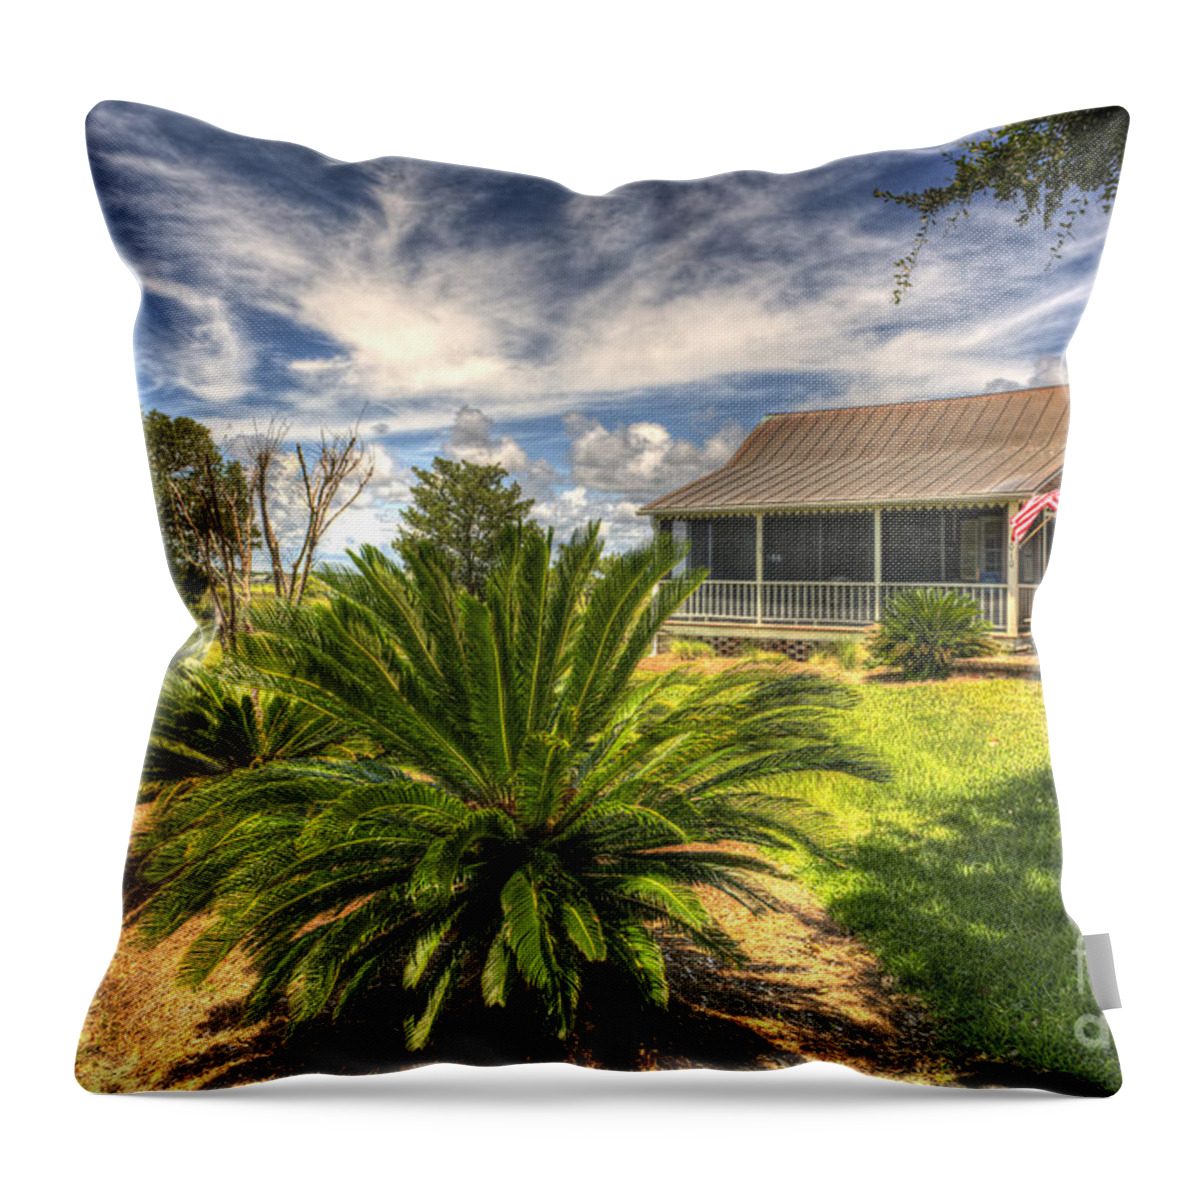 Sullivan's Island Throw Pillow featuring the photograph Sullivan's Island Retreat by Dale Powell